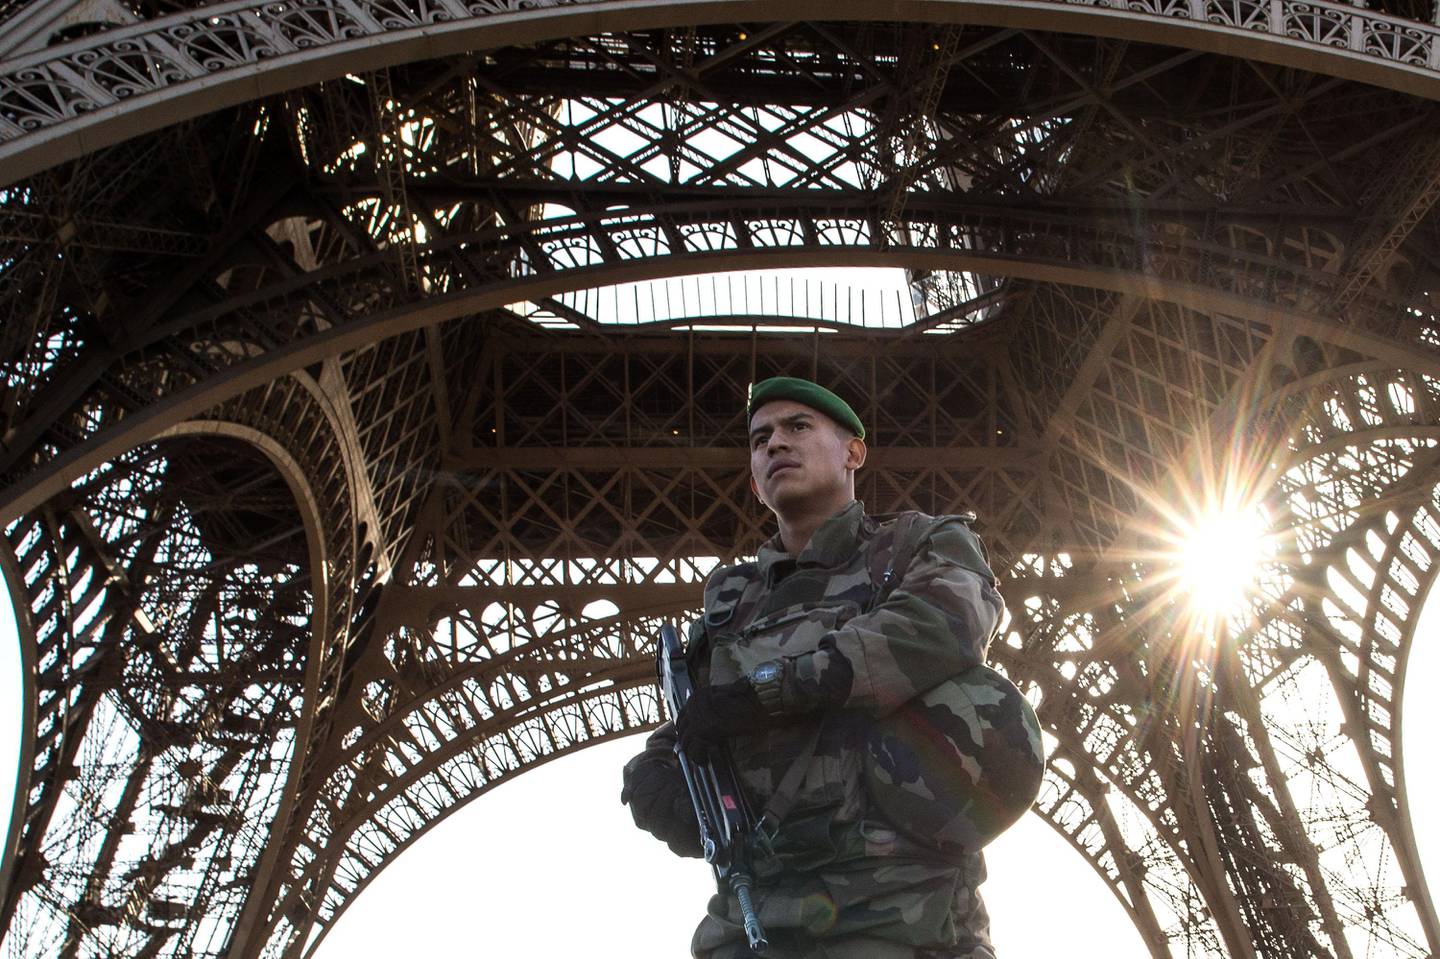 PARIS, FRANCE - NOVEMBER 15:  A French soldier stands guard at Eiffel Tower on November 15, 2015 in Paris, France. As France observes three days of national mourning members of the public continue to pay tribute to the victims of Friday's deadly attacks. A special service for the families of the victims and survivors is to be held at Paris's Notre Dame Cathedral later on Sunday.  (Photo by David Ramos/Getty Images)